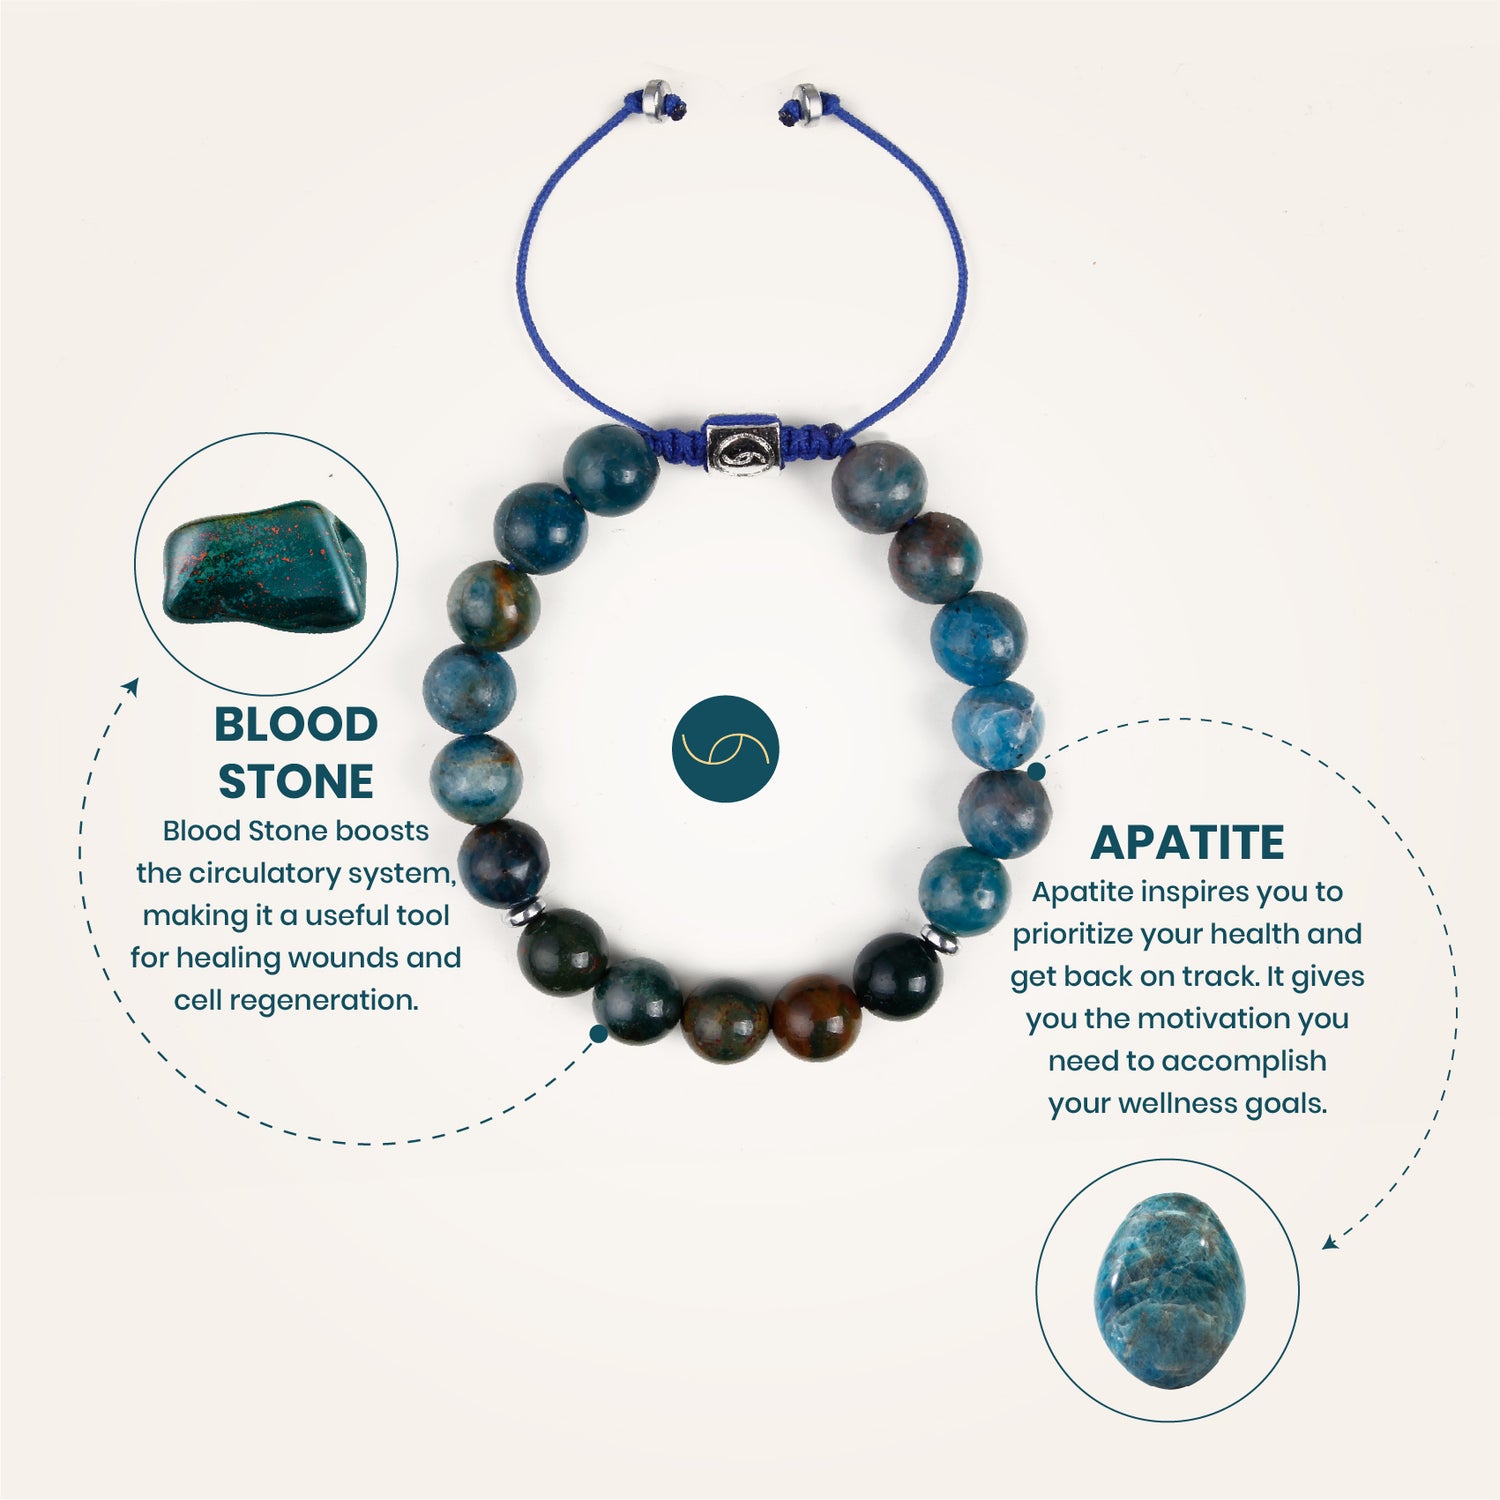 Benefits of Apatite and Blood Stone